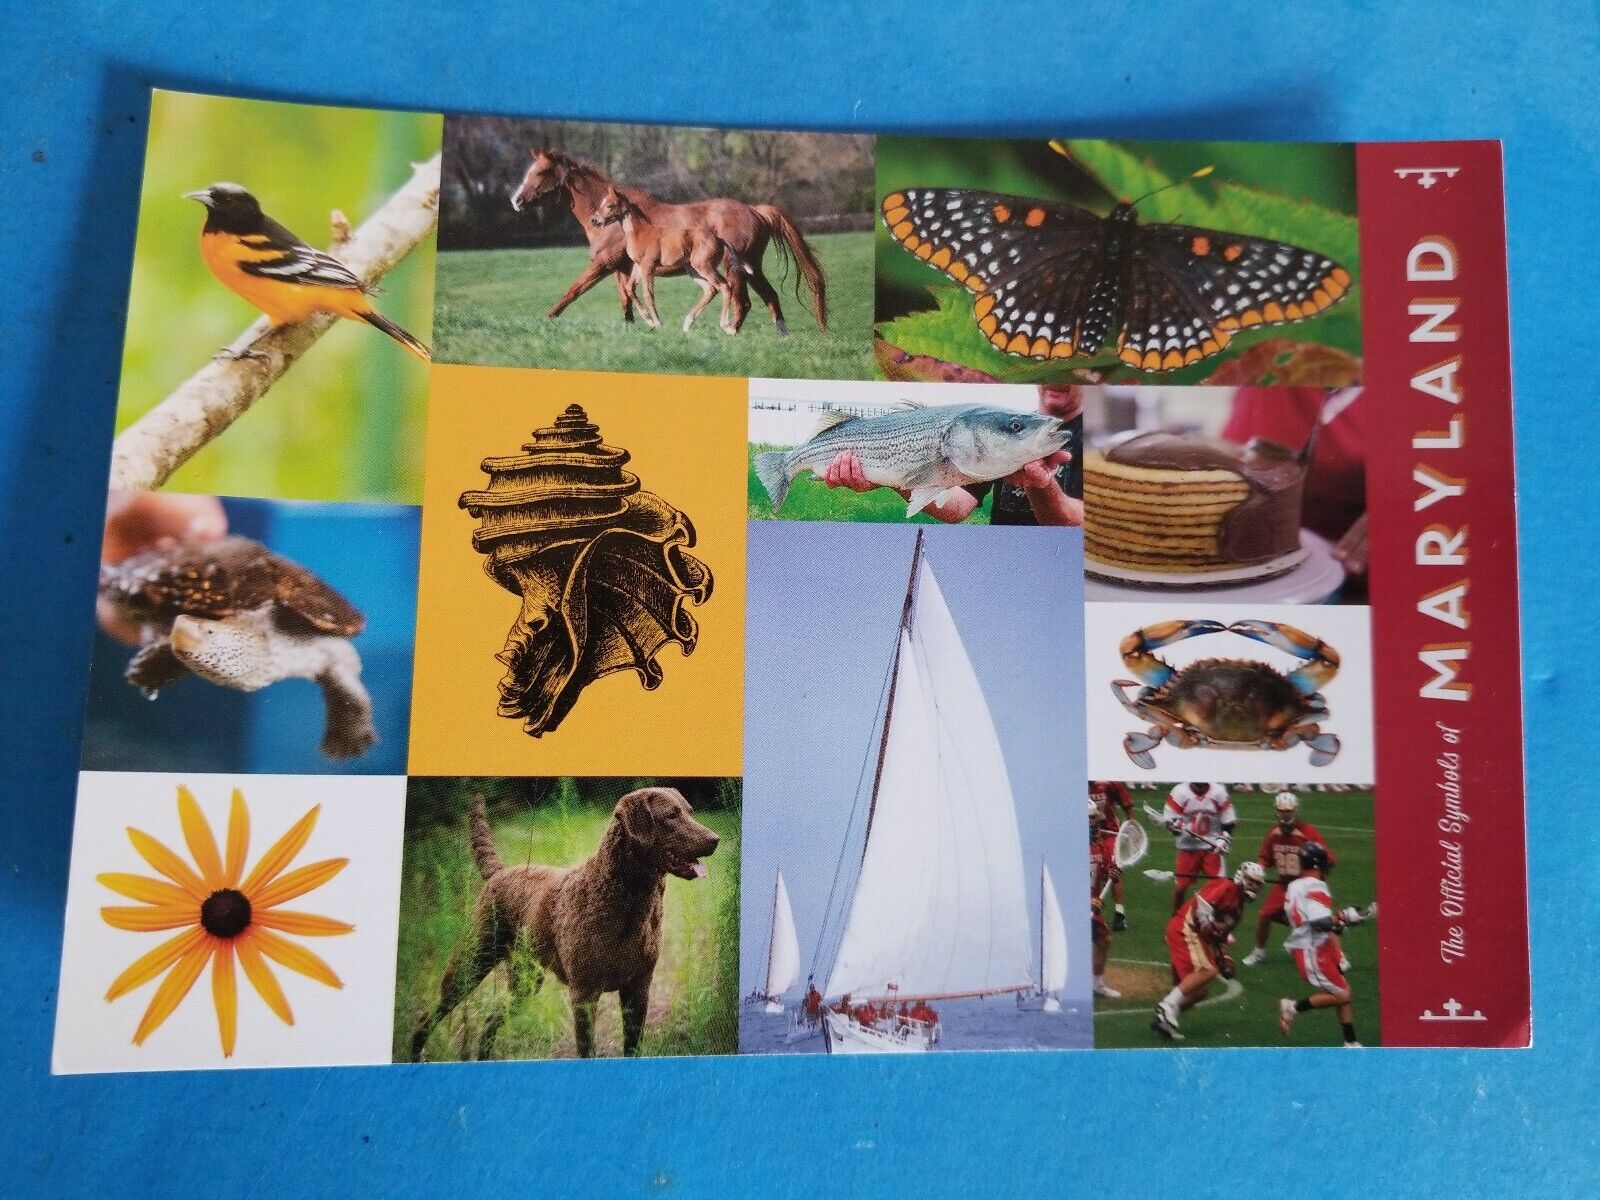 THE OFFICIAL SYMBOLS OF MARYLAND MINT CONDITION UNUSED POSTCARD.